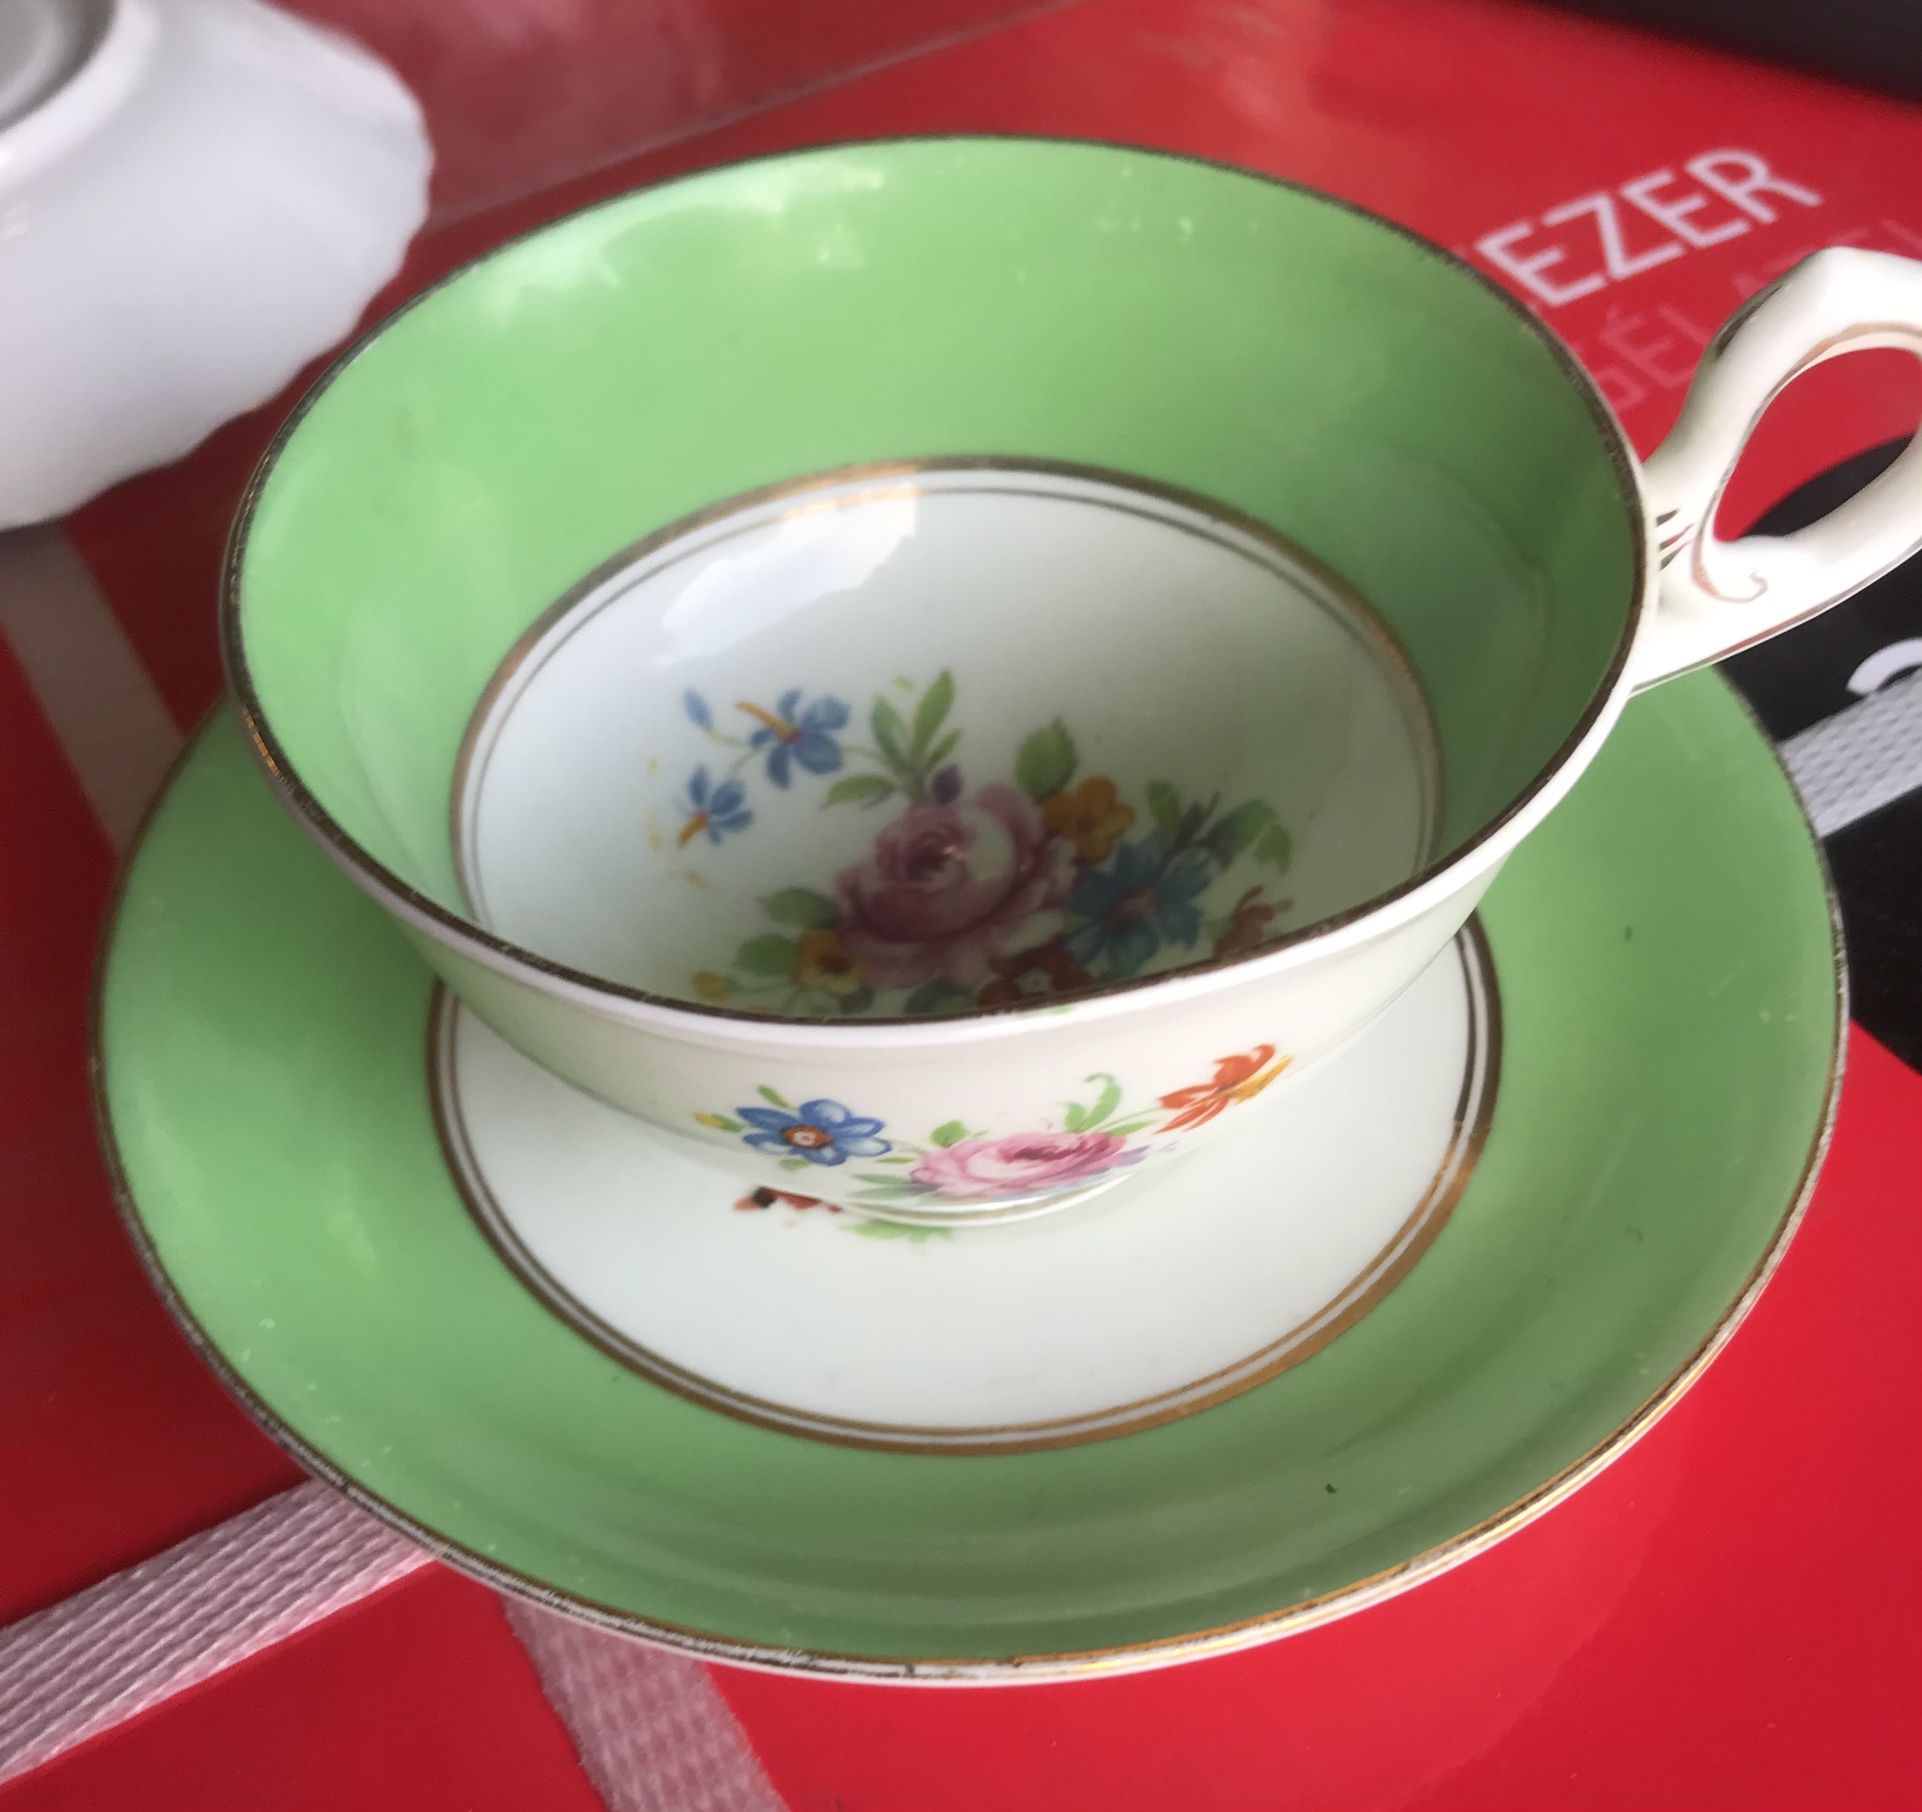 Vintage Sampson Smith Old Royal Bone China Tea Cup & Saucer. Multicolored Flowers with a green band. 